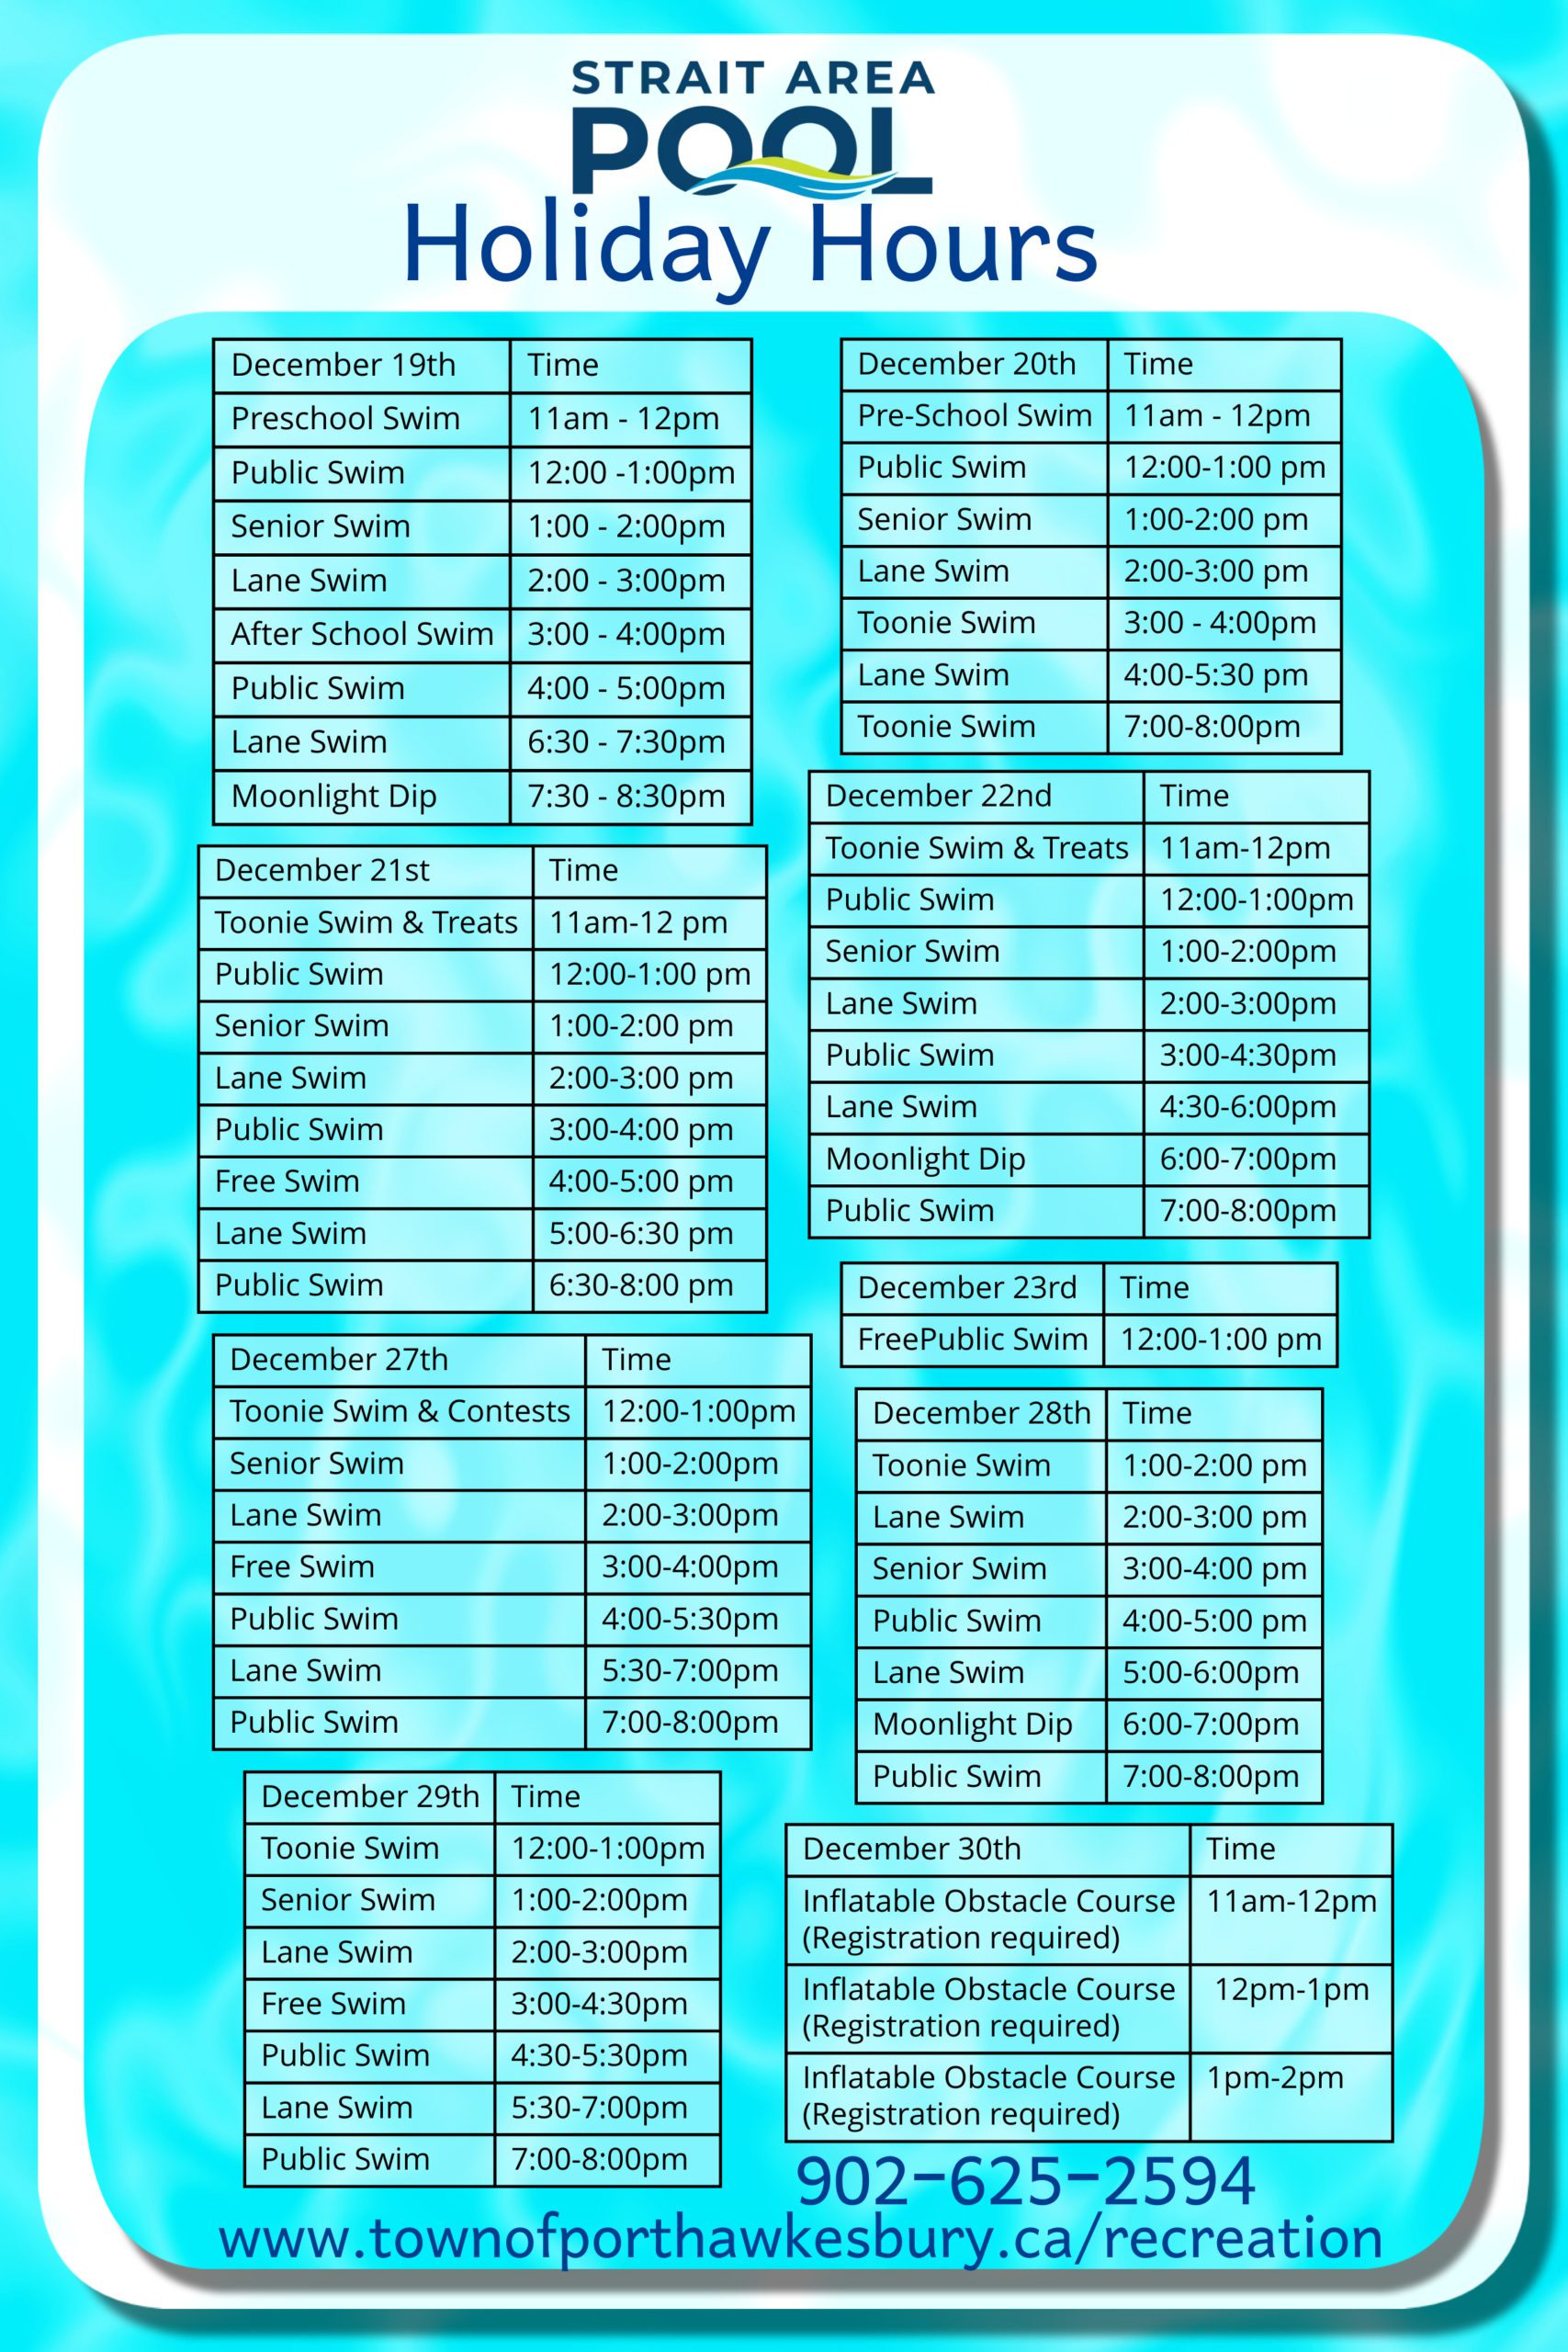 Strait Area Pool Holiday Hours